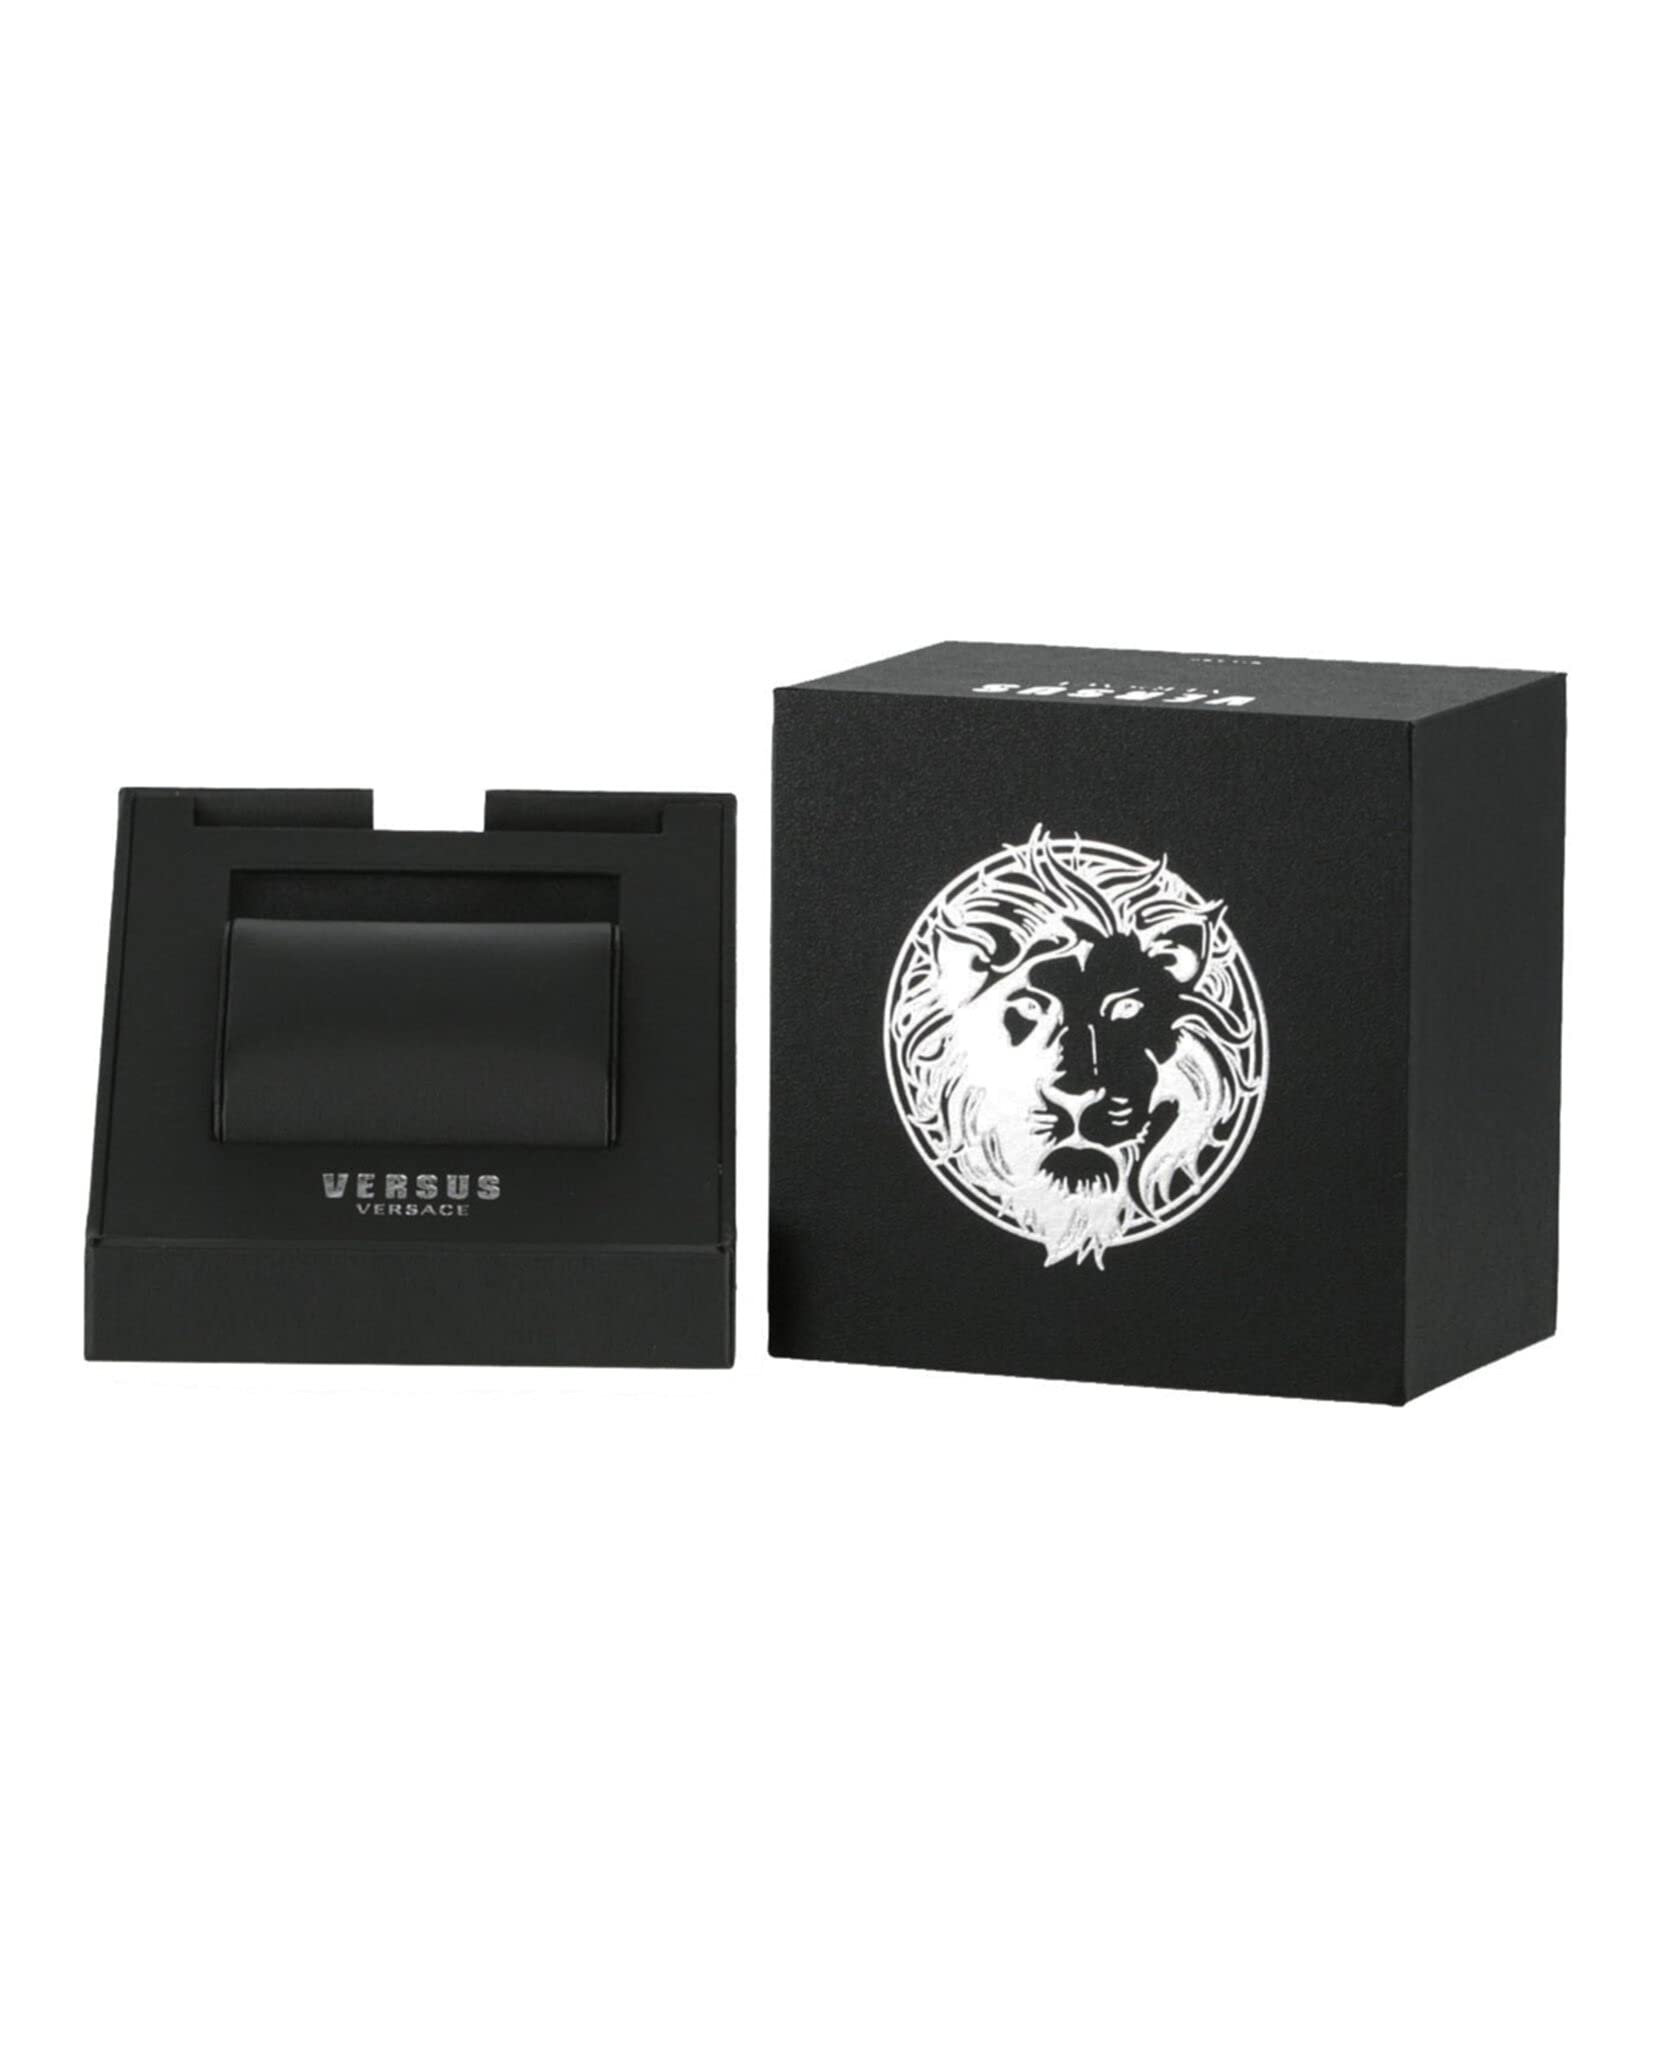 Versus Versace Gold Tone Womens Fashion Watch. Brick Lane Lion Genuine Black Leather Adjustable Strap Watch with Black Sunray Dial.